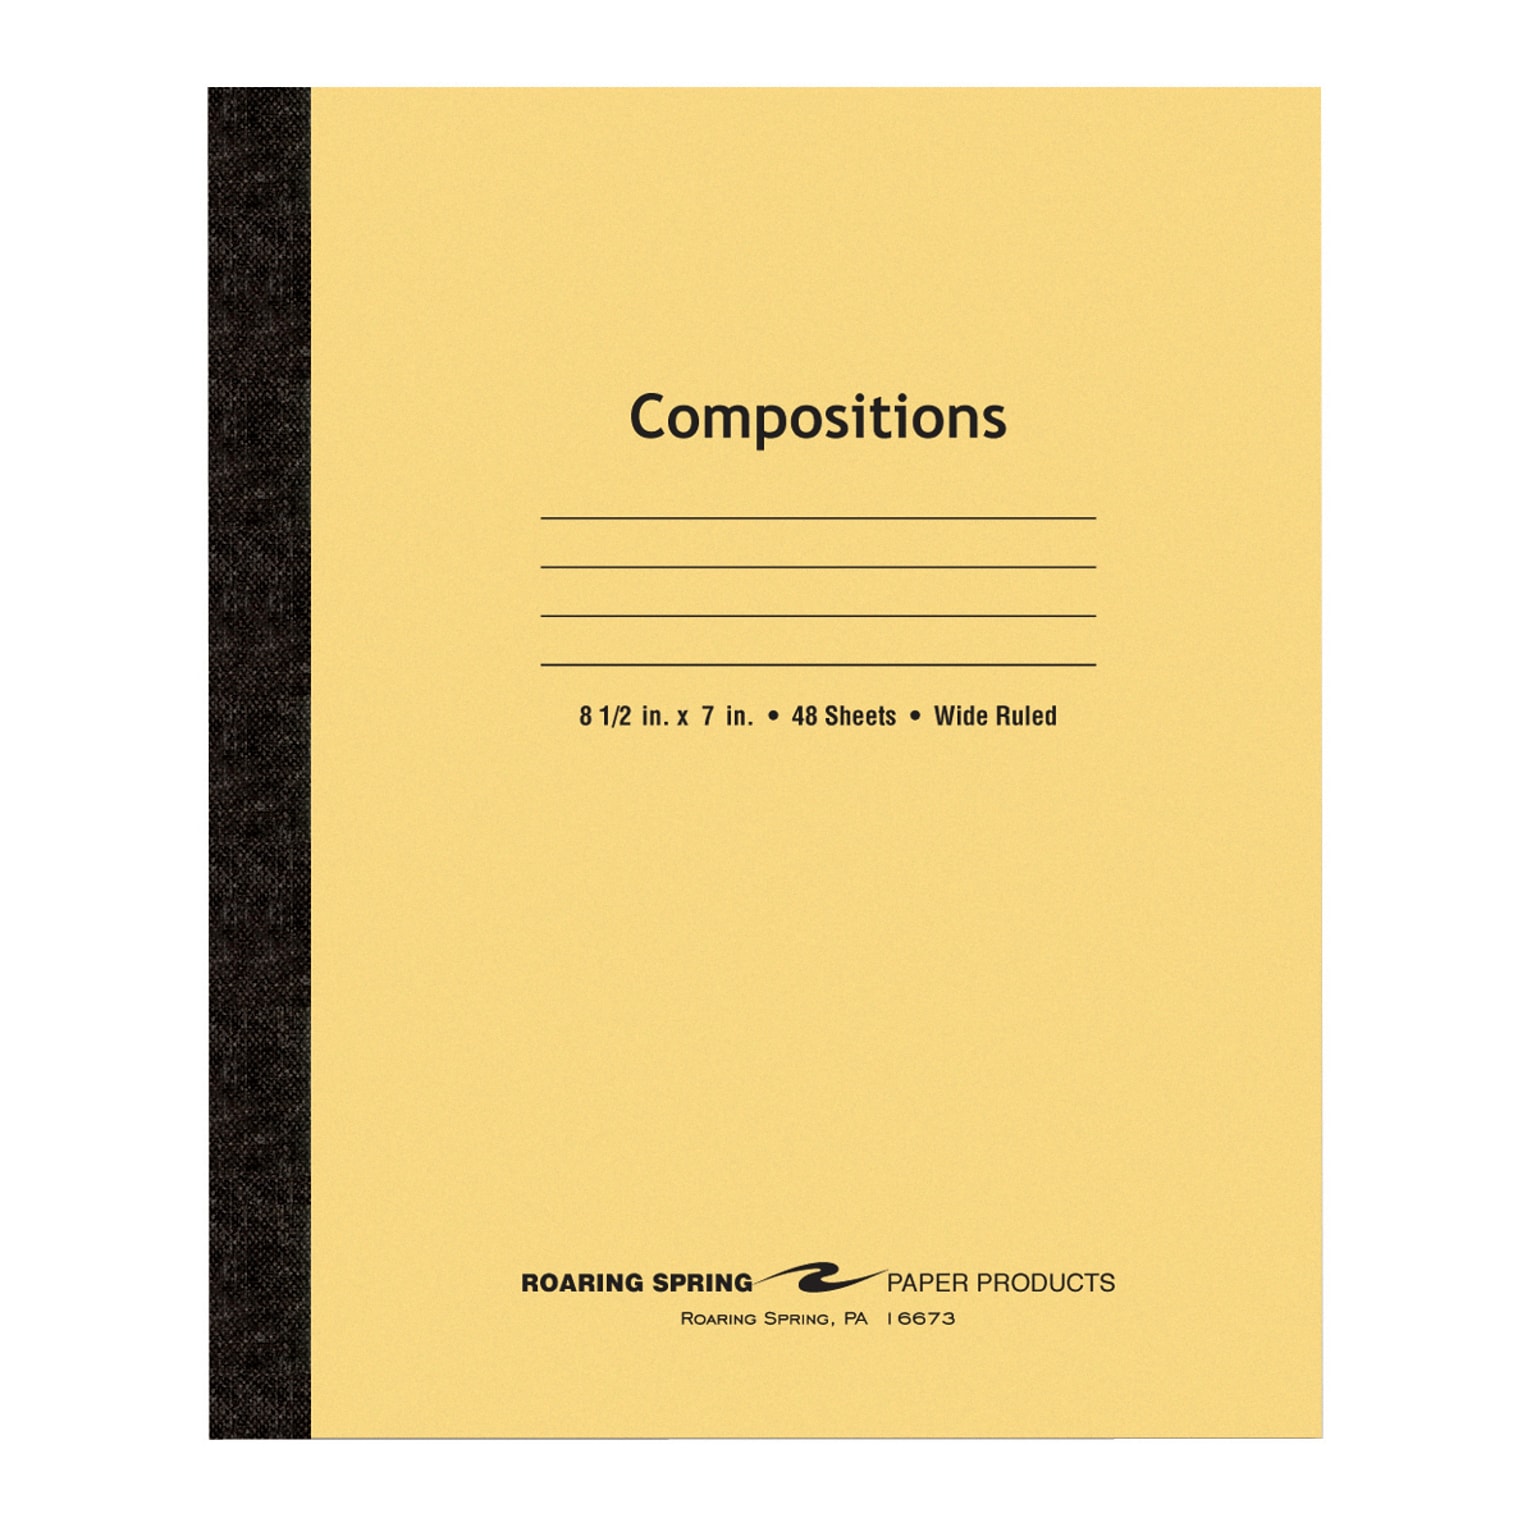 Roaring Spring Paper Products 1-Subject Composition Notebooks, 7 x 8.5, Wide Ruled, 48 Sheets, Brown (77308)